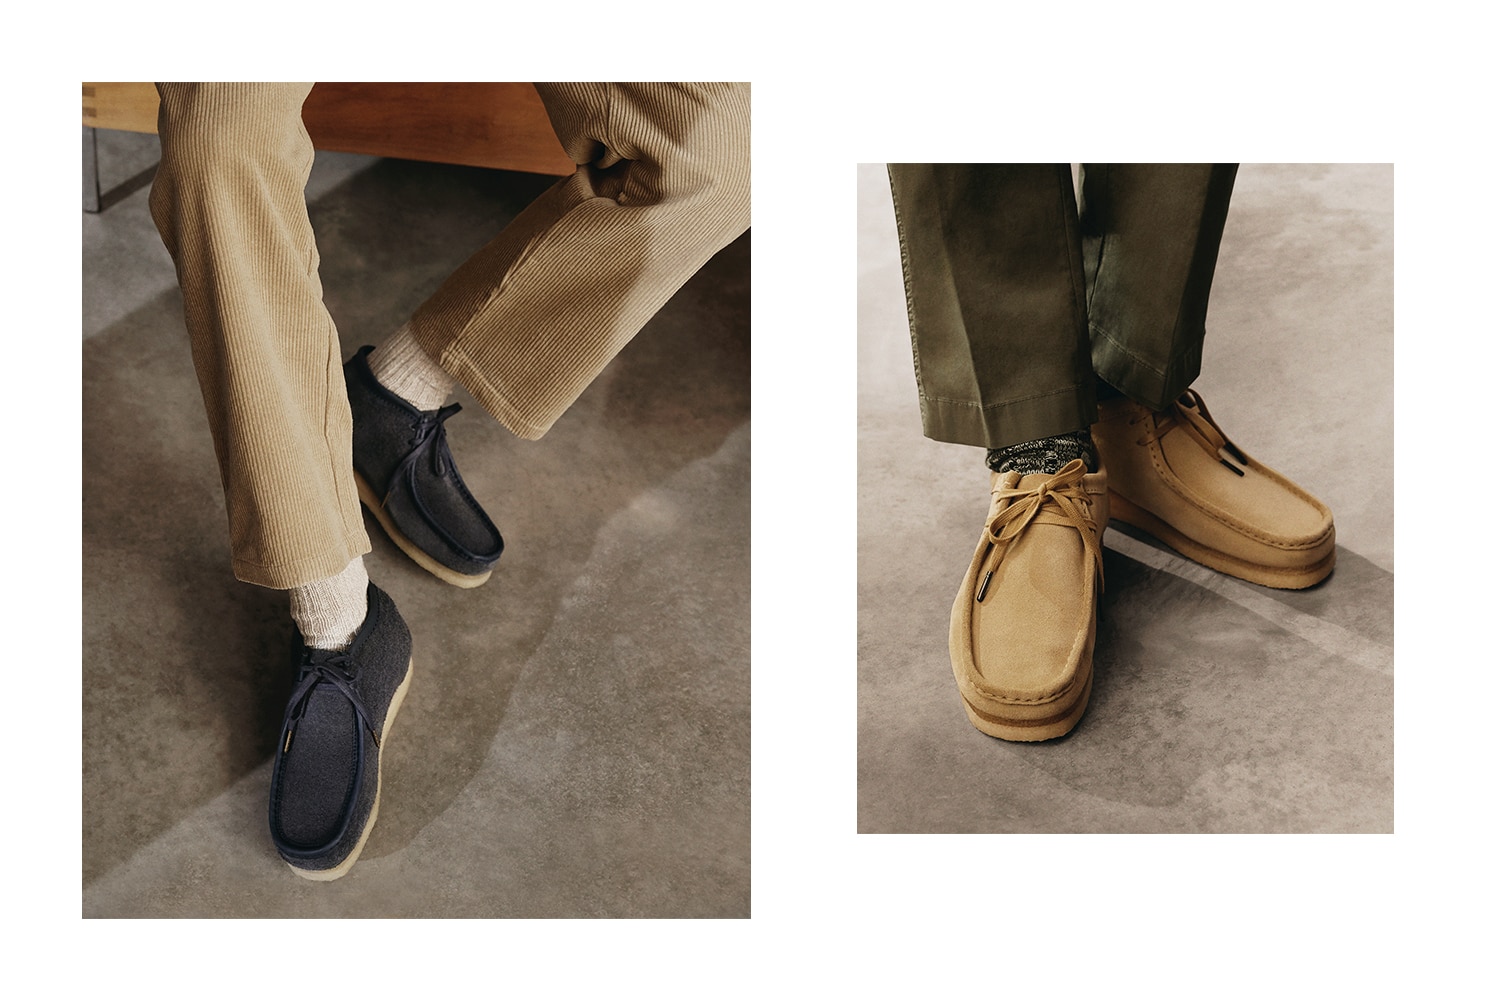 History This Year With Iconic Shoes From Clarks Originals | Journal | MR PORTER